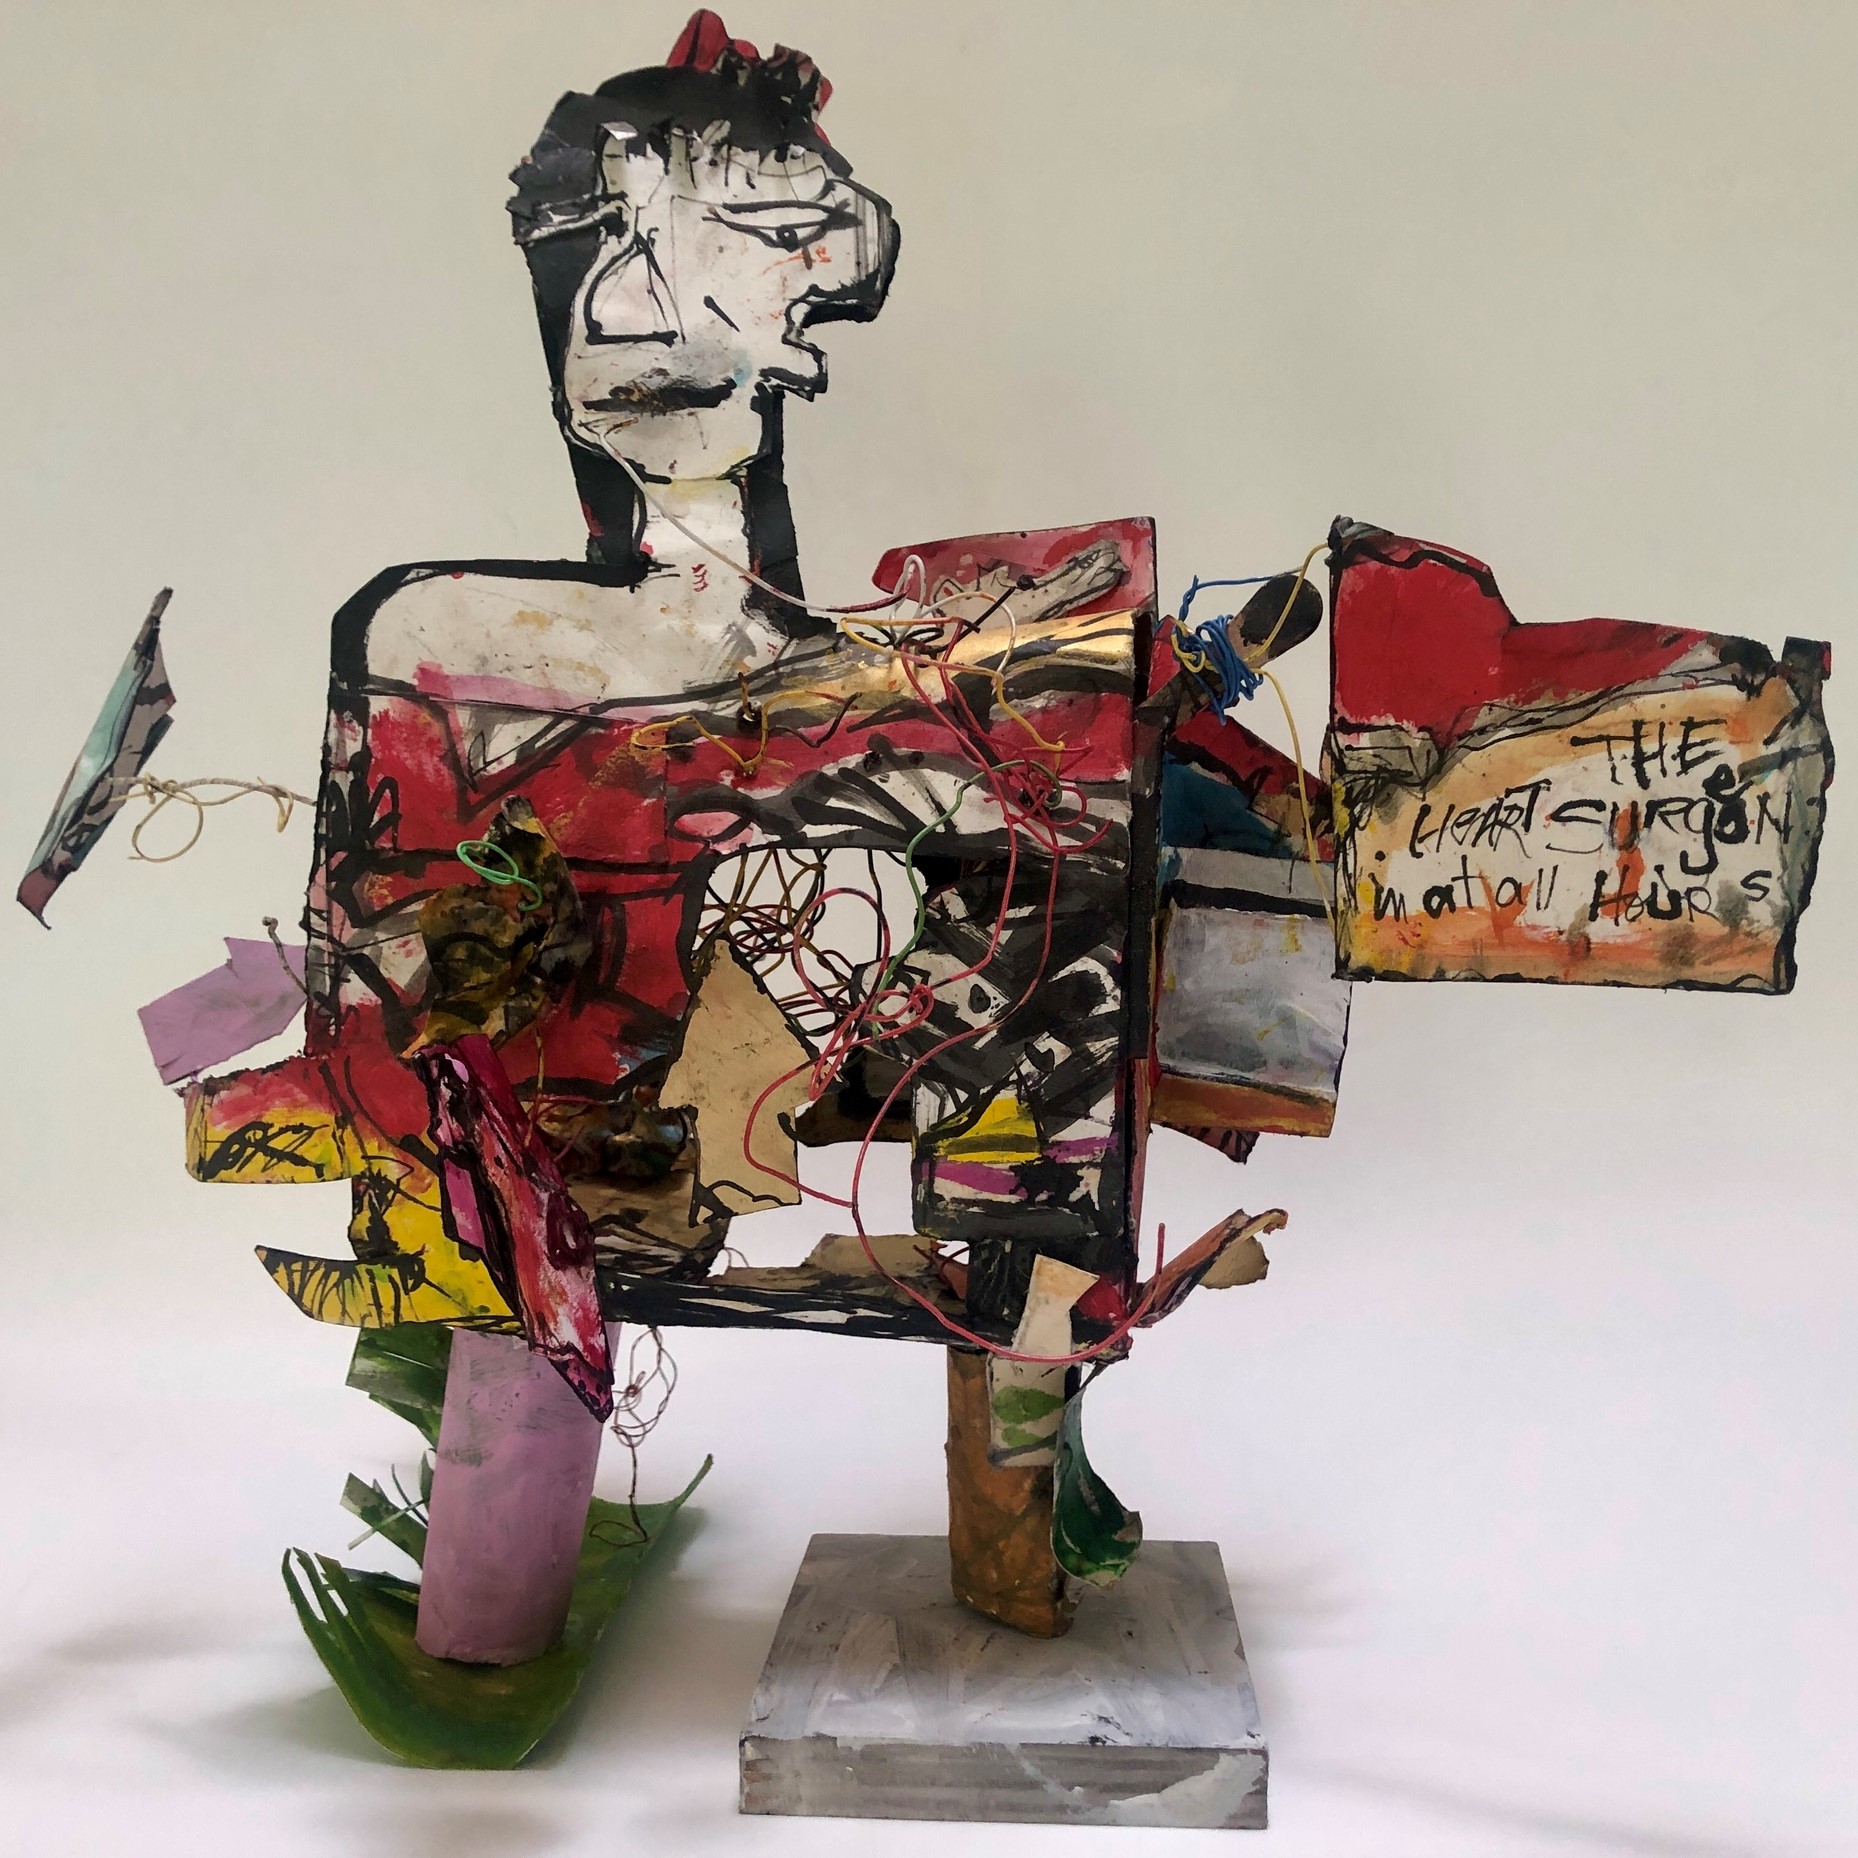 an abstract sculpture with a face, square body, and two feet standing on two different types of materials with a sign with the saying "The Heat Surgeon in at all Hours".